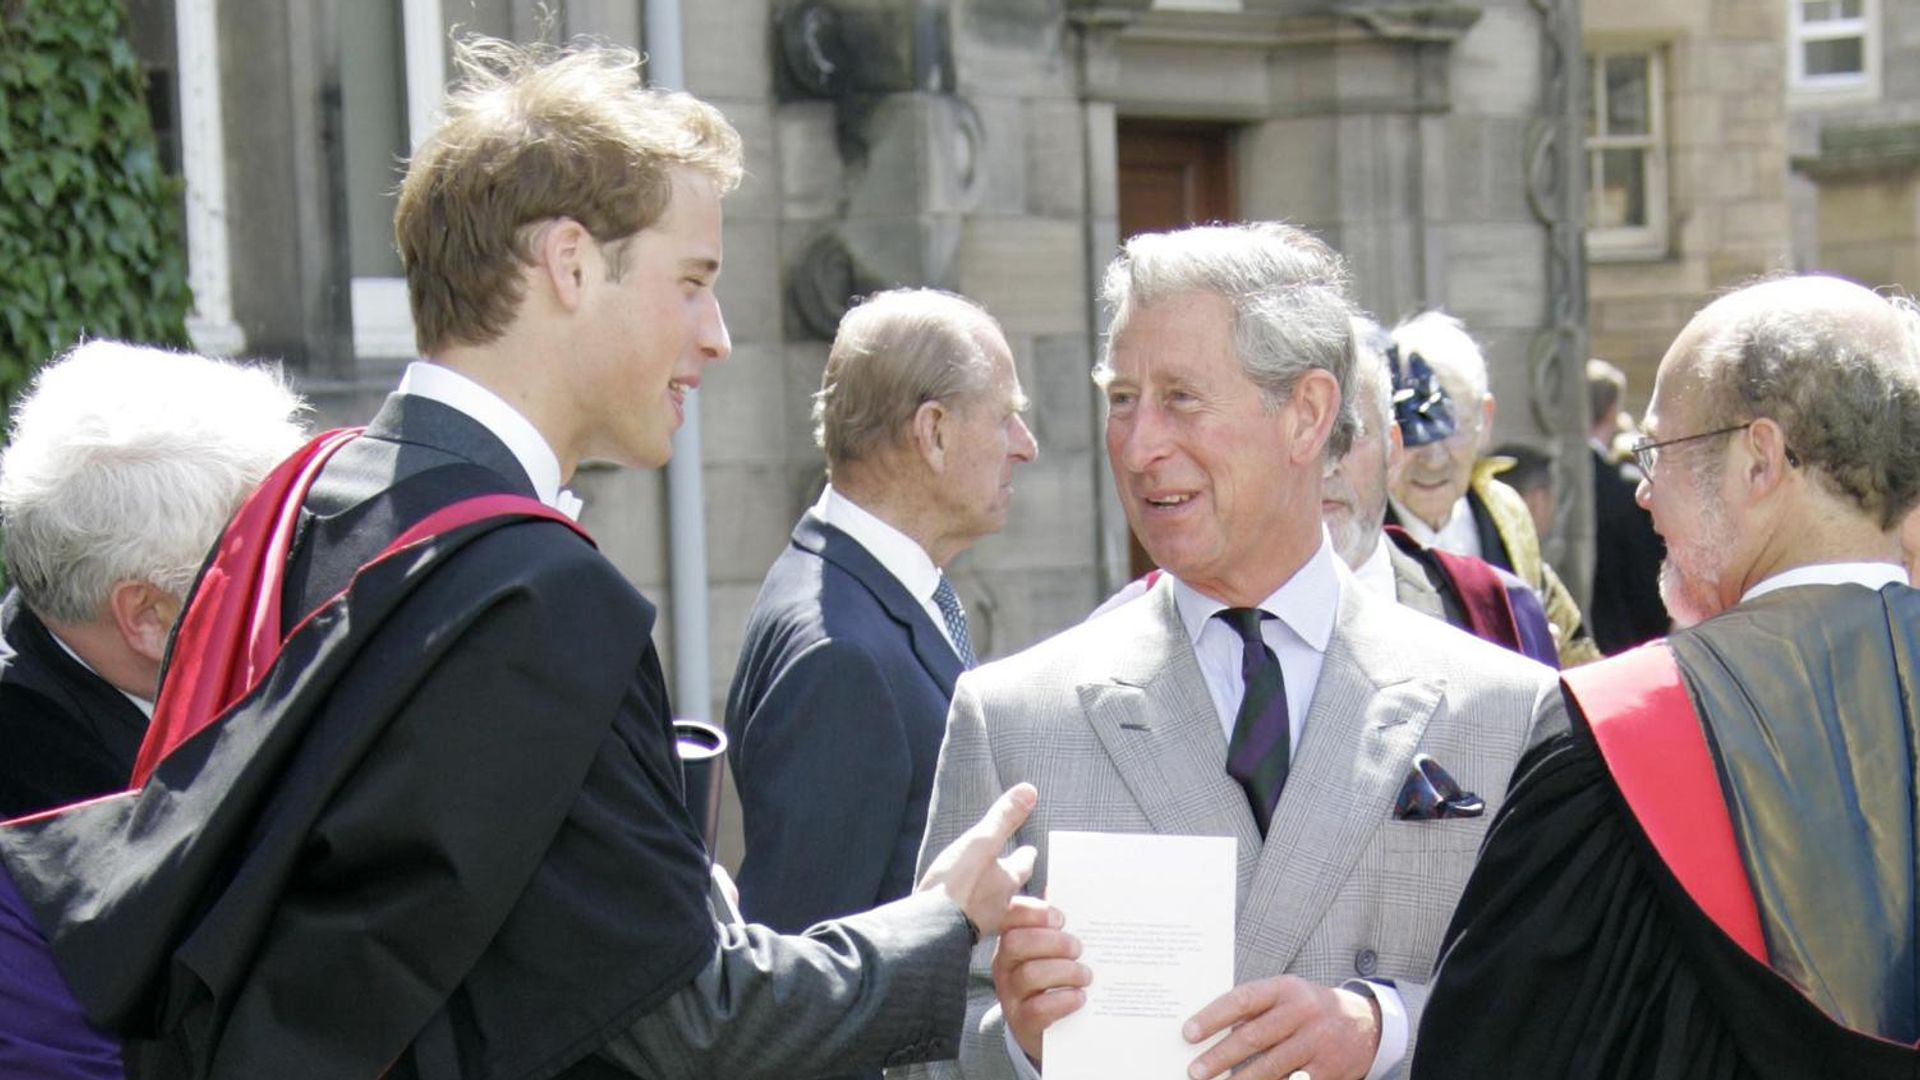 Prince William and Prince Charles after a graduation ceremony at the University Of St Andrews in 2005